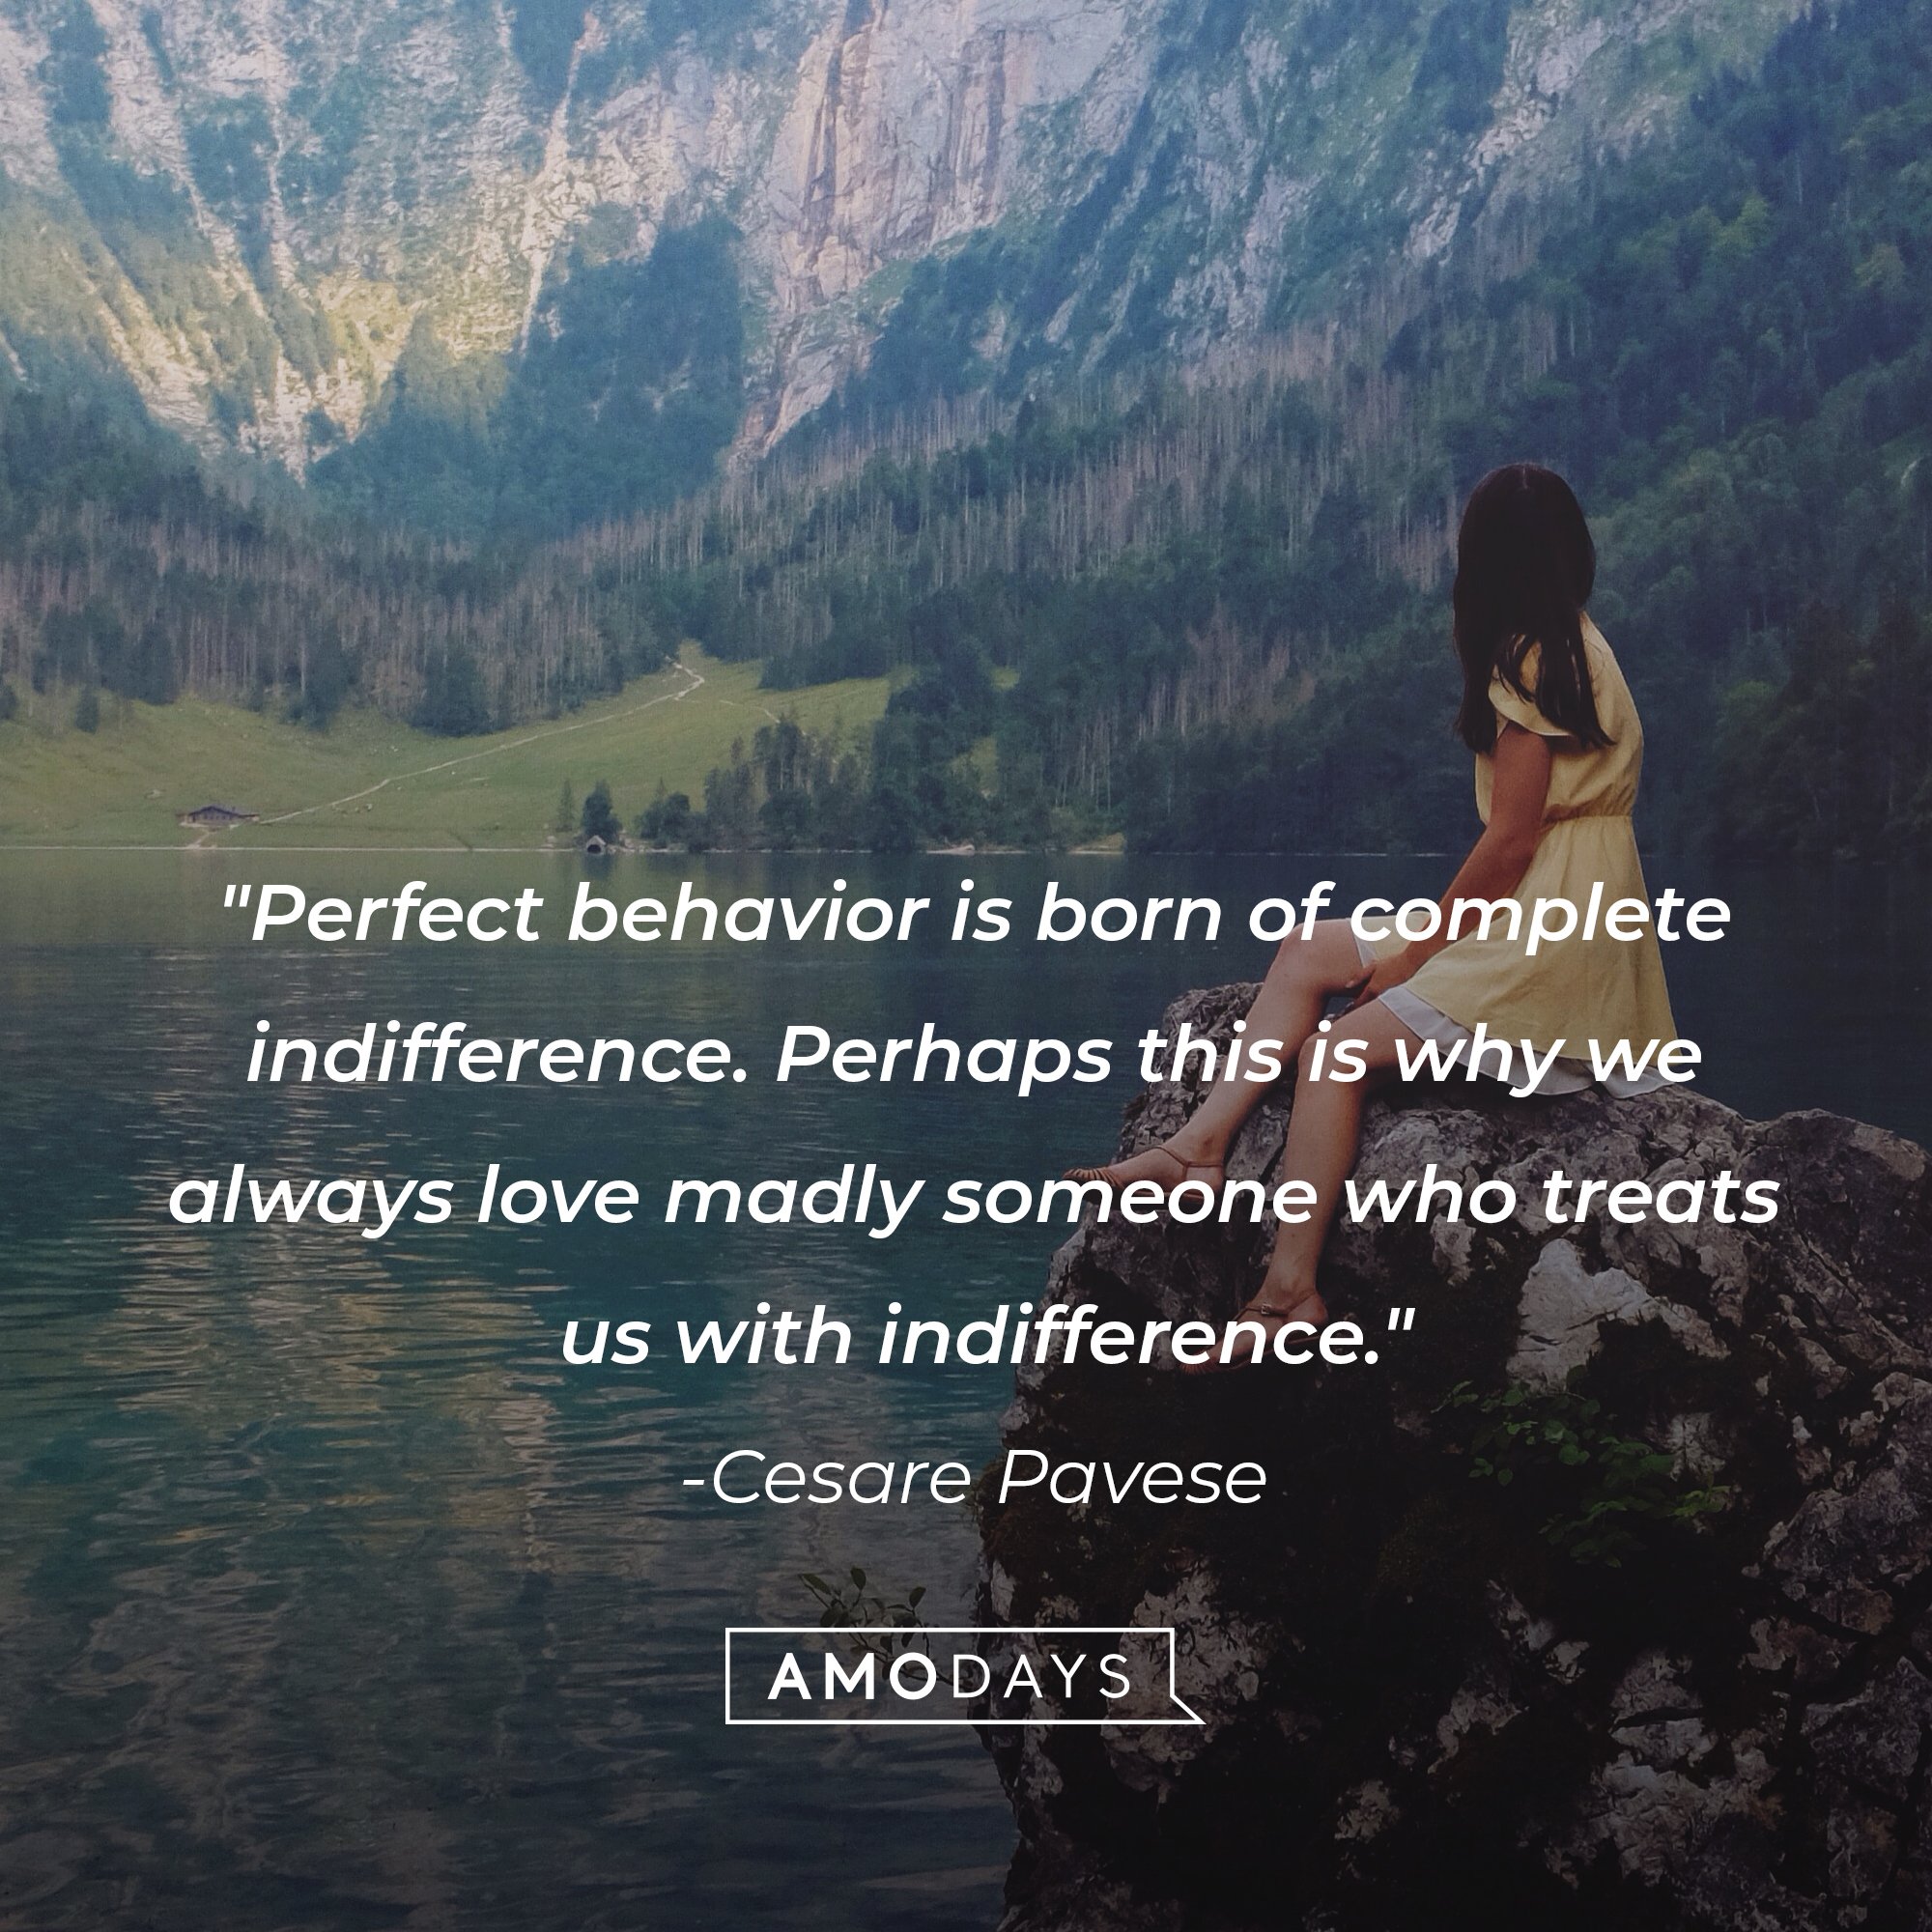 Cesare Pavese's quote: "Perfect behavior is born of complete indifference. Perhaps this is why we always love madly someone who treats us with indifference." | Image: AmoDays